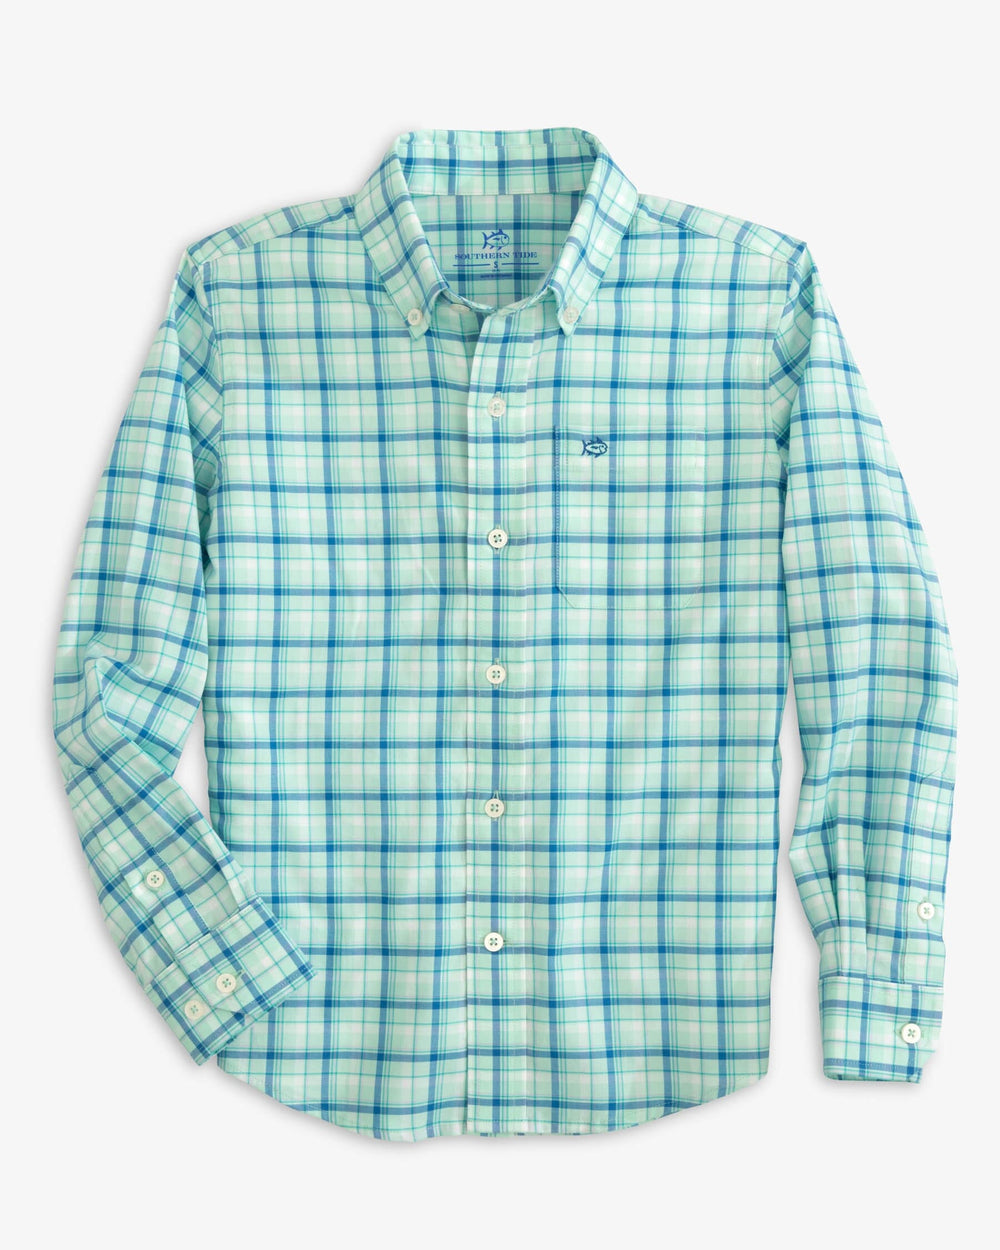 The front view of the Southern Tide Boys Skipjack Palermo Plaid Sport Shirt by Southern Tide - Baltic Teal